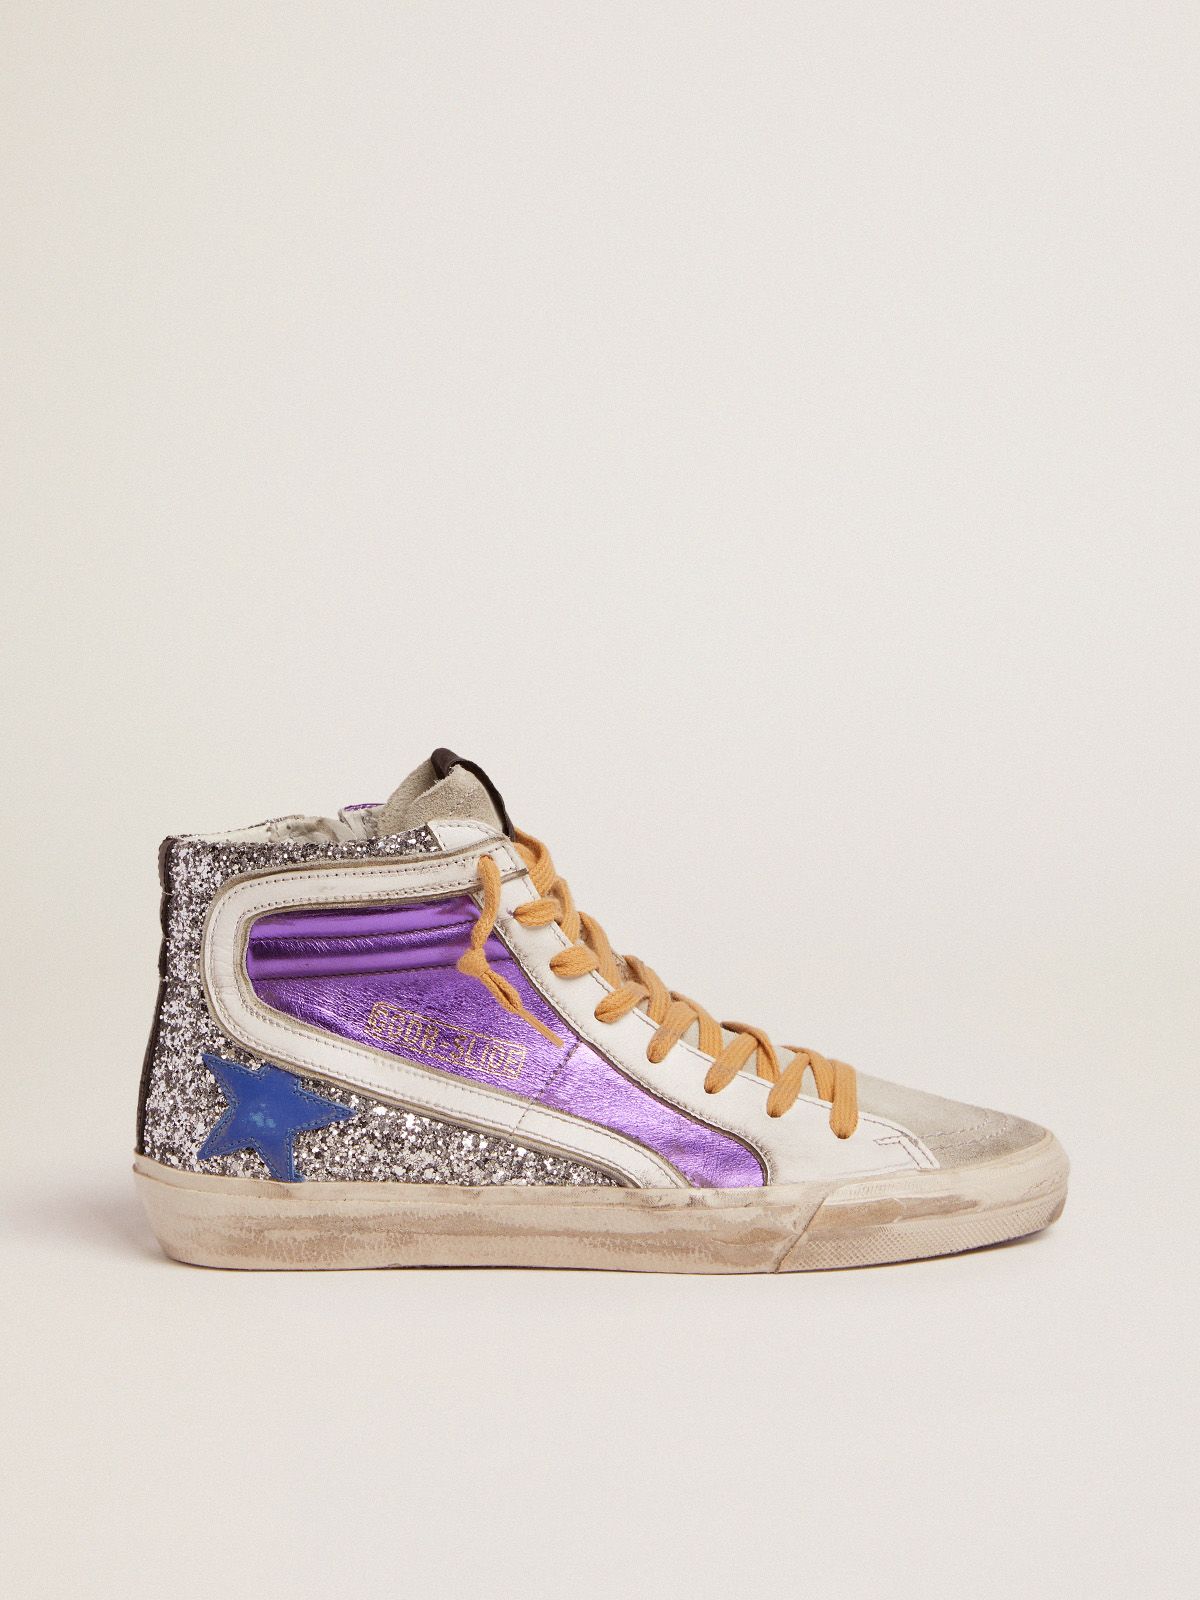 golden goose with glitter Slide sneakers silver purple and laminated leather upper